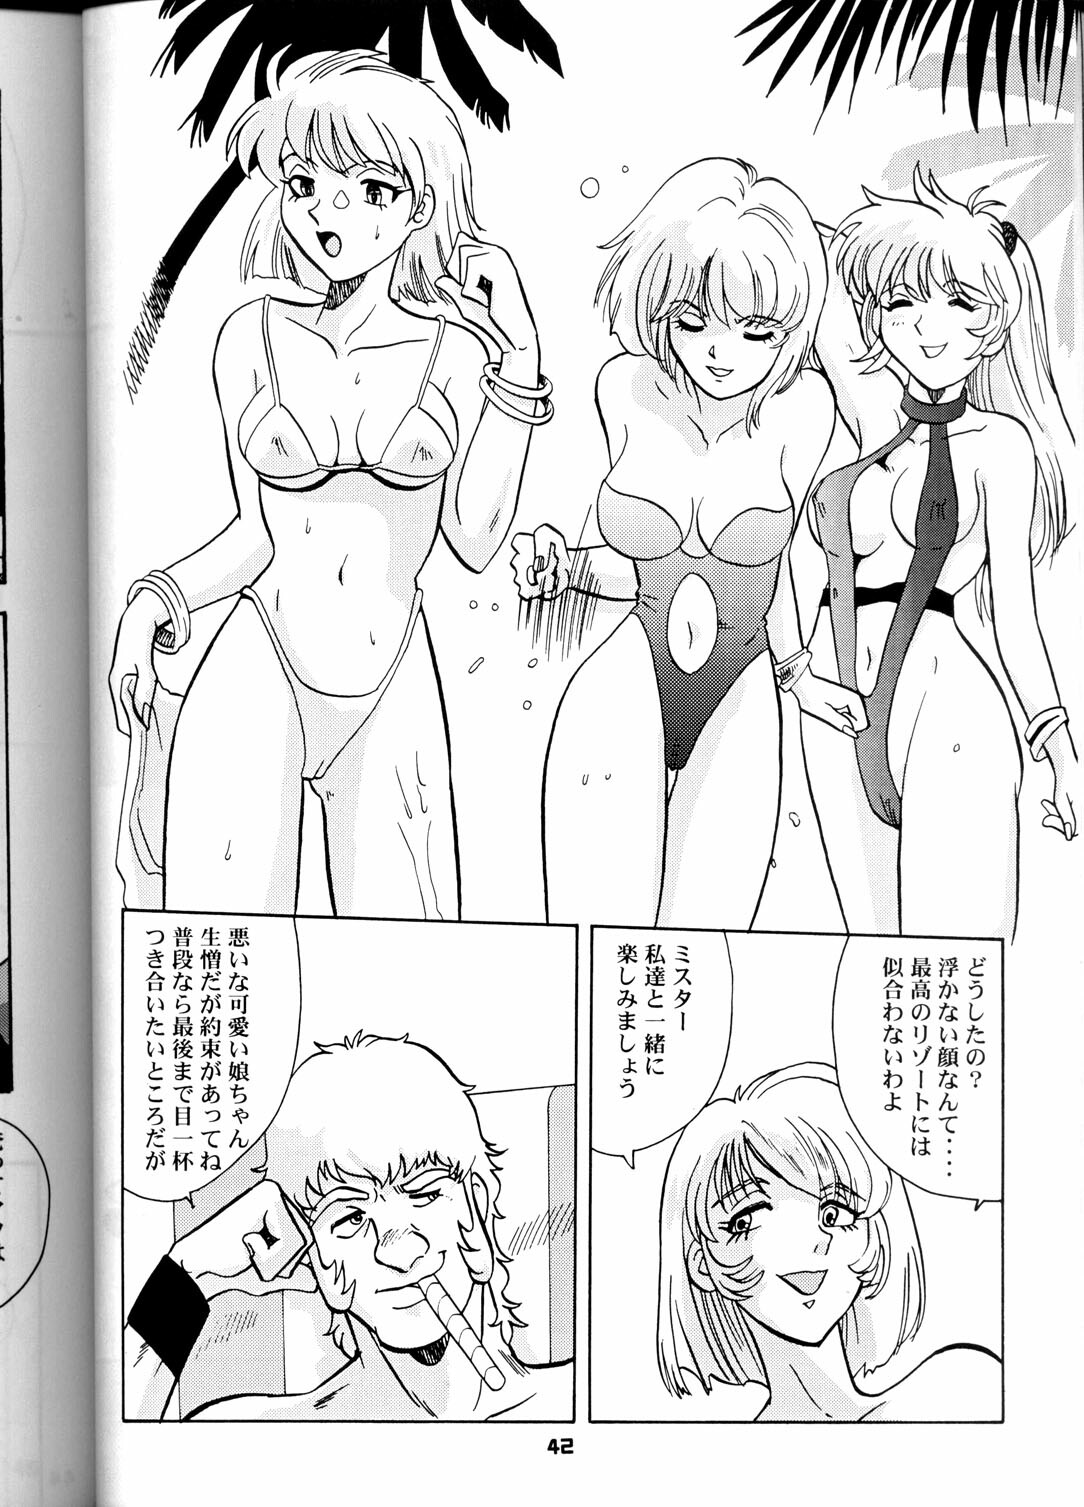 (C58) [T2 UNIT (Various)] OH! Robo Musume Chuushuugou! (Various) page 42 full